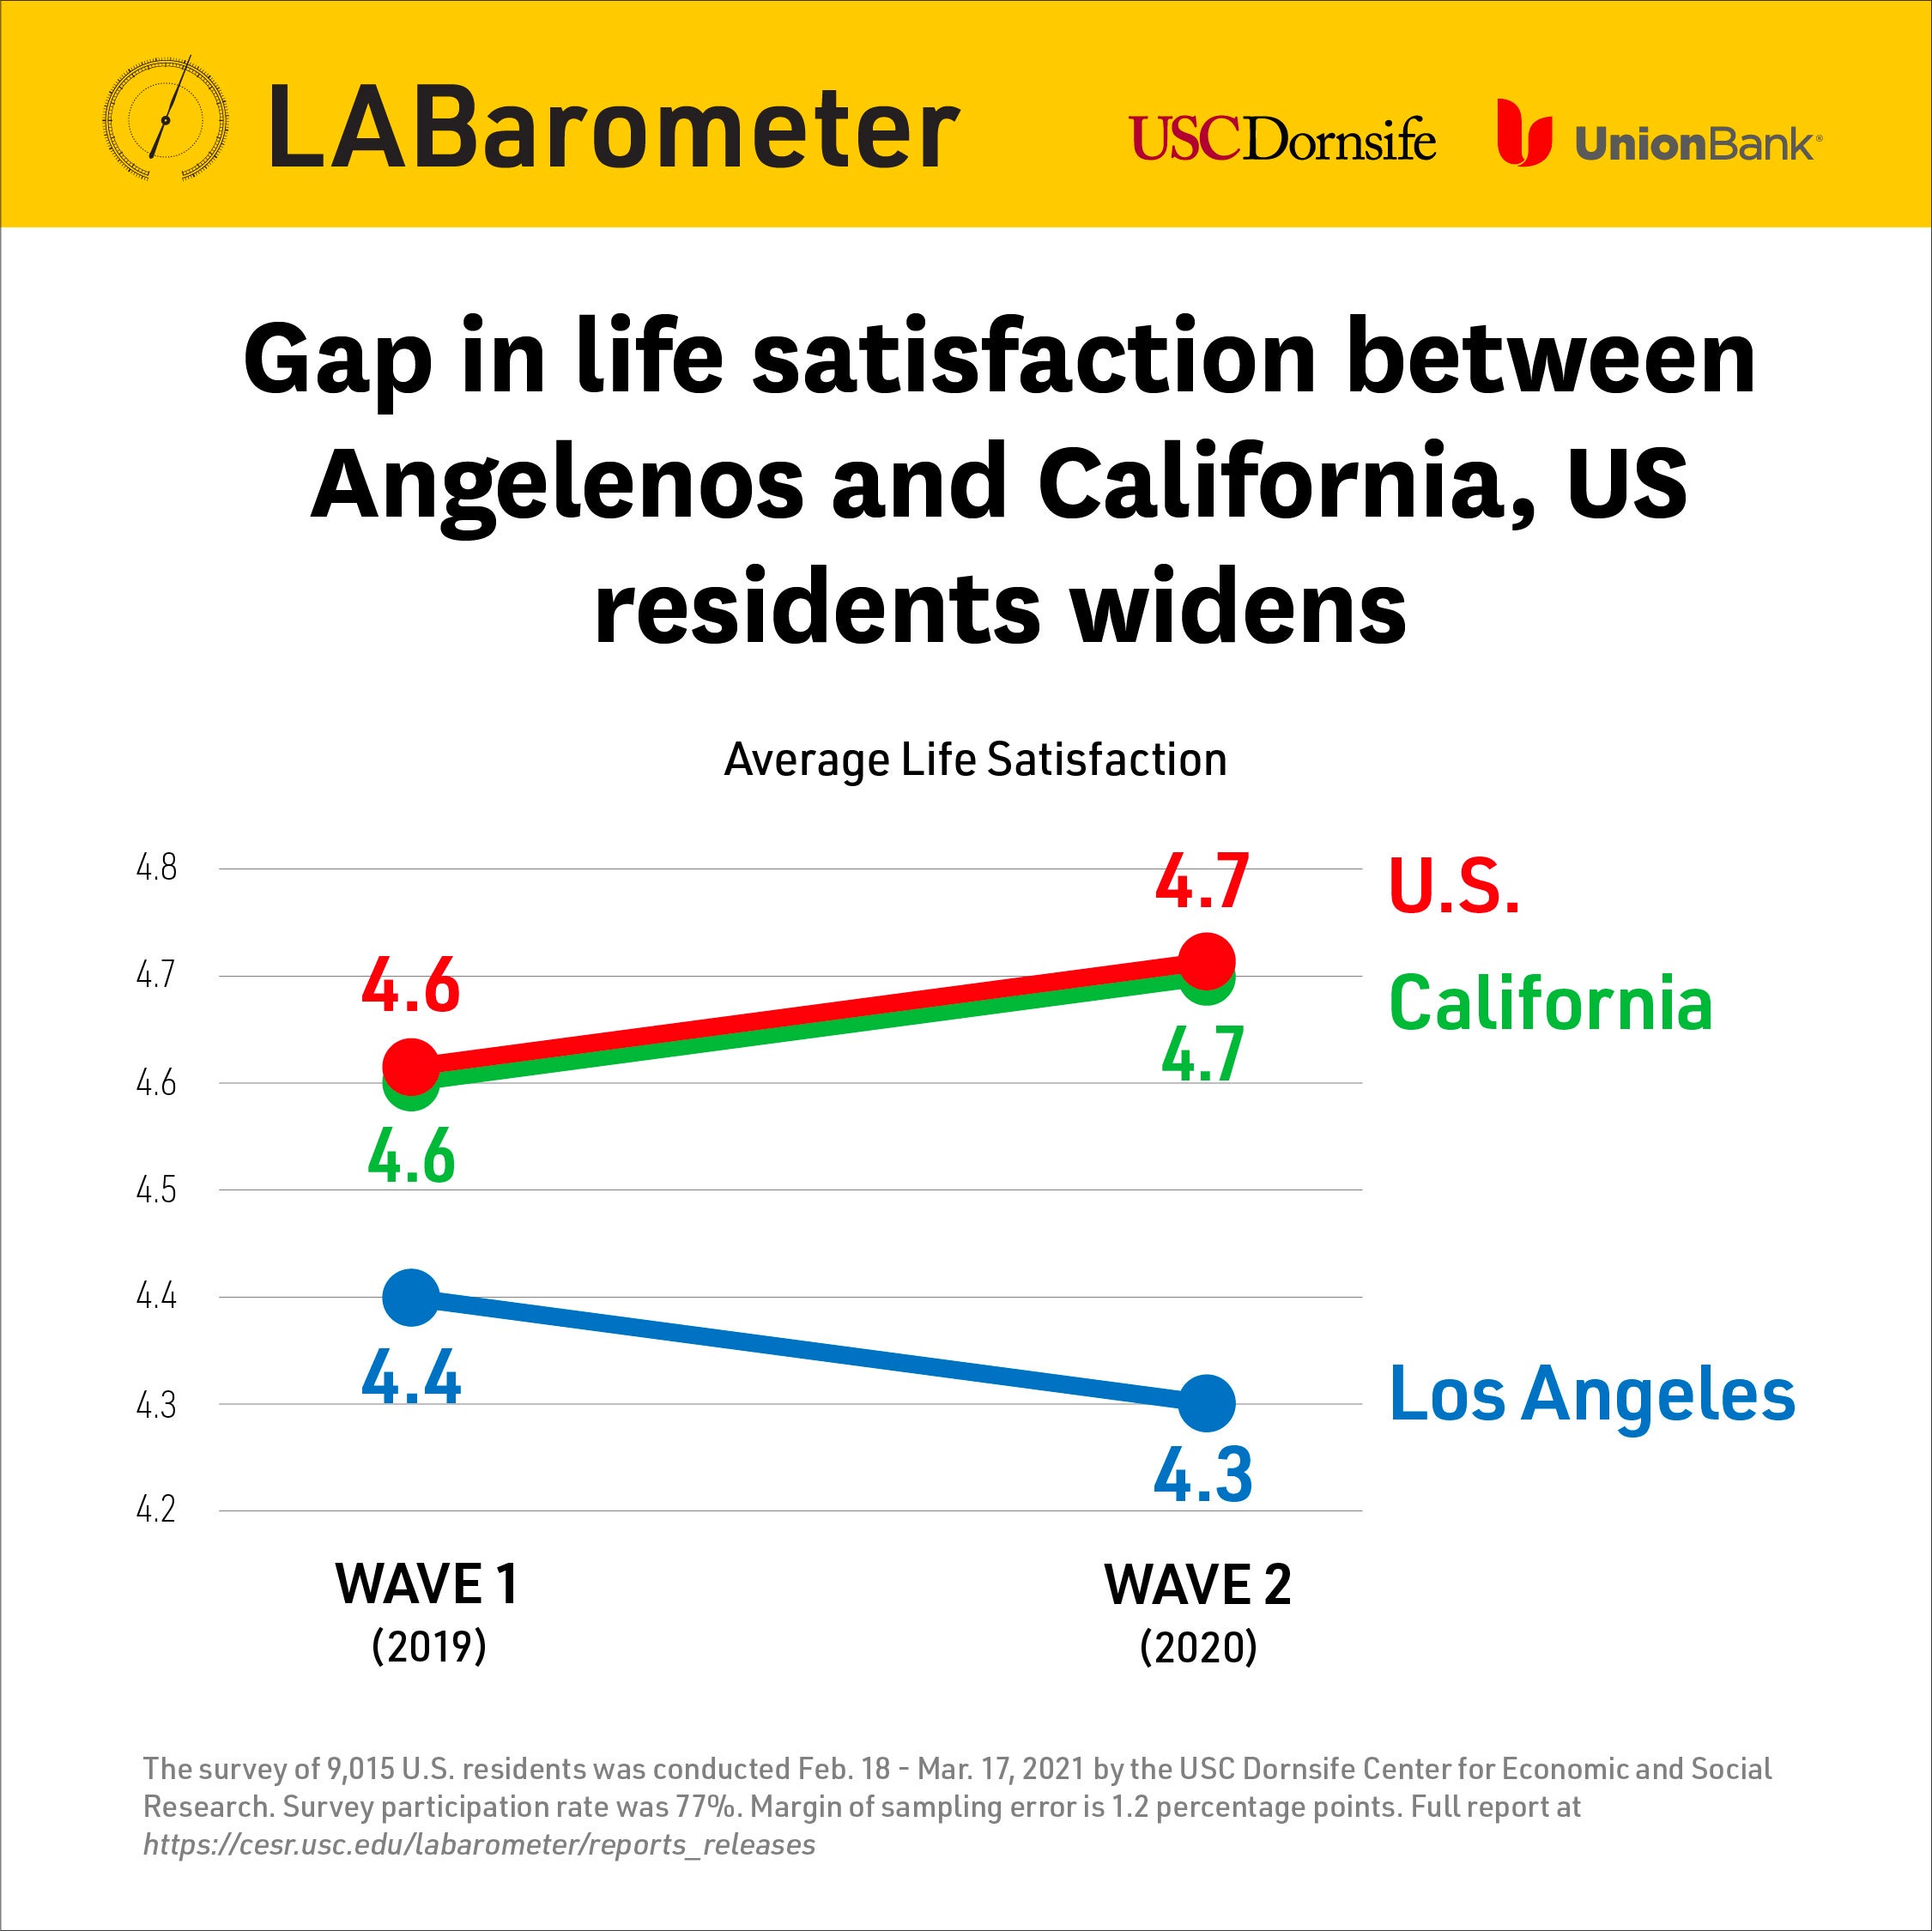 Line graph indicates gap in life satifaction between L.A., California and U.S. residents widened from 2019 to 2020